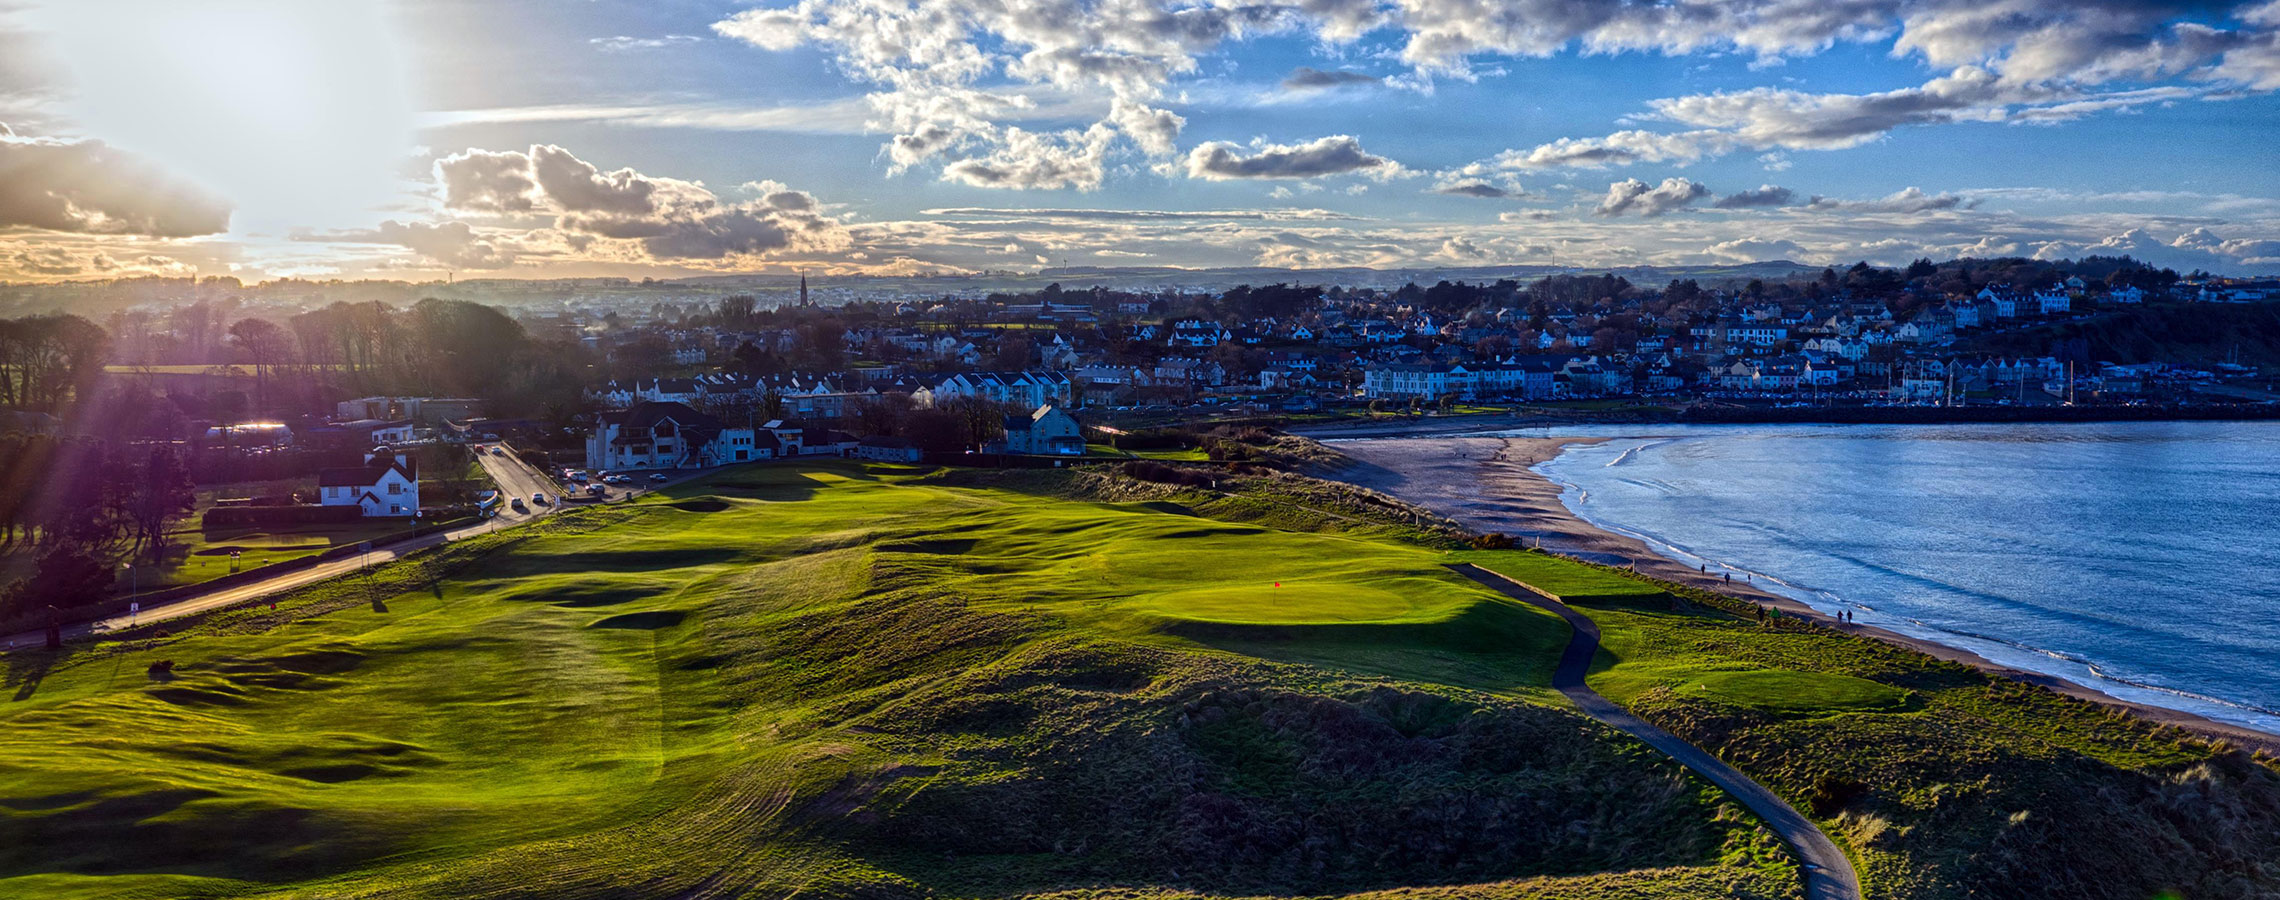 Is there more to Golf in Northern Ireland than Royal County Down & Royal Portrush?